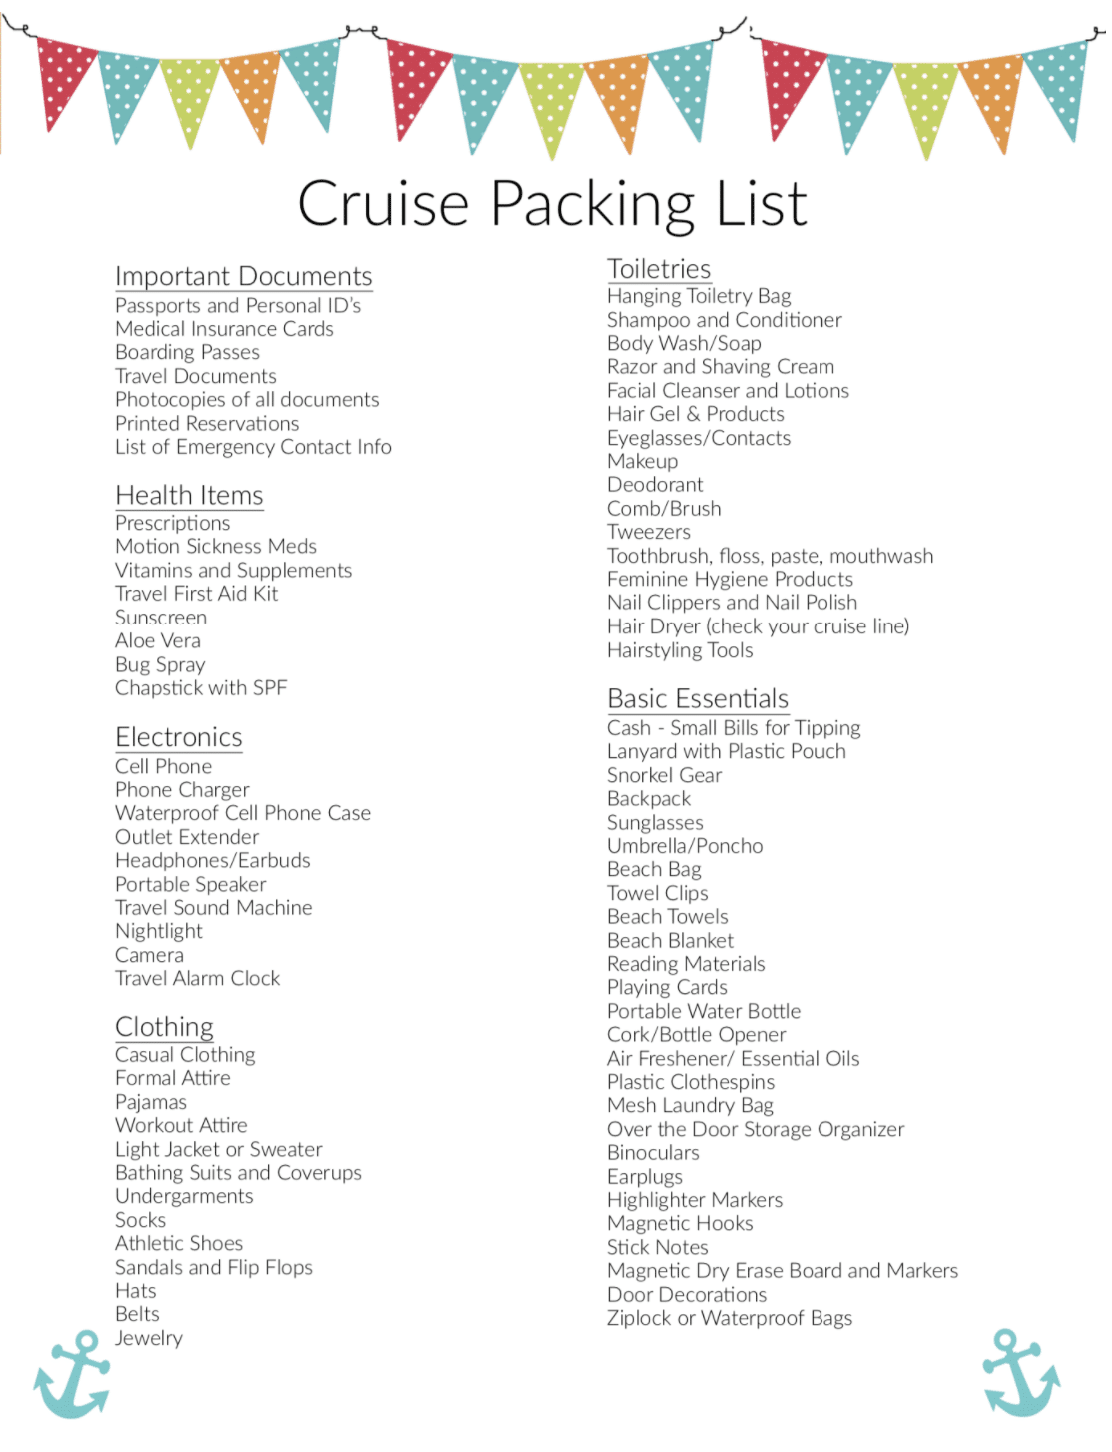 Cruise Packing List